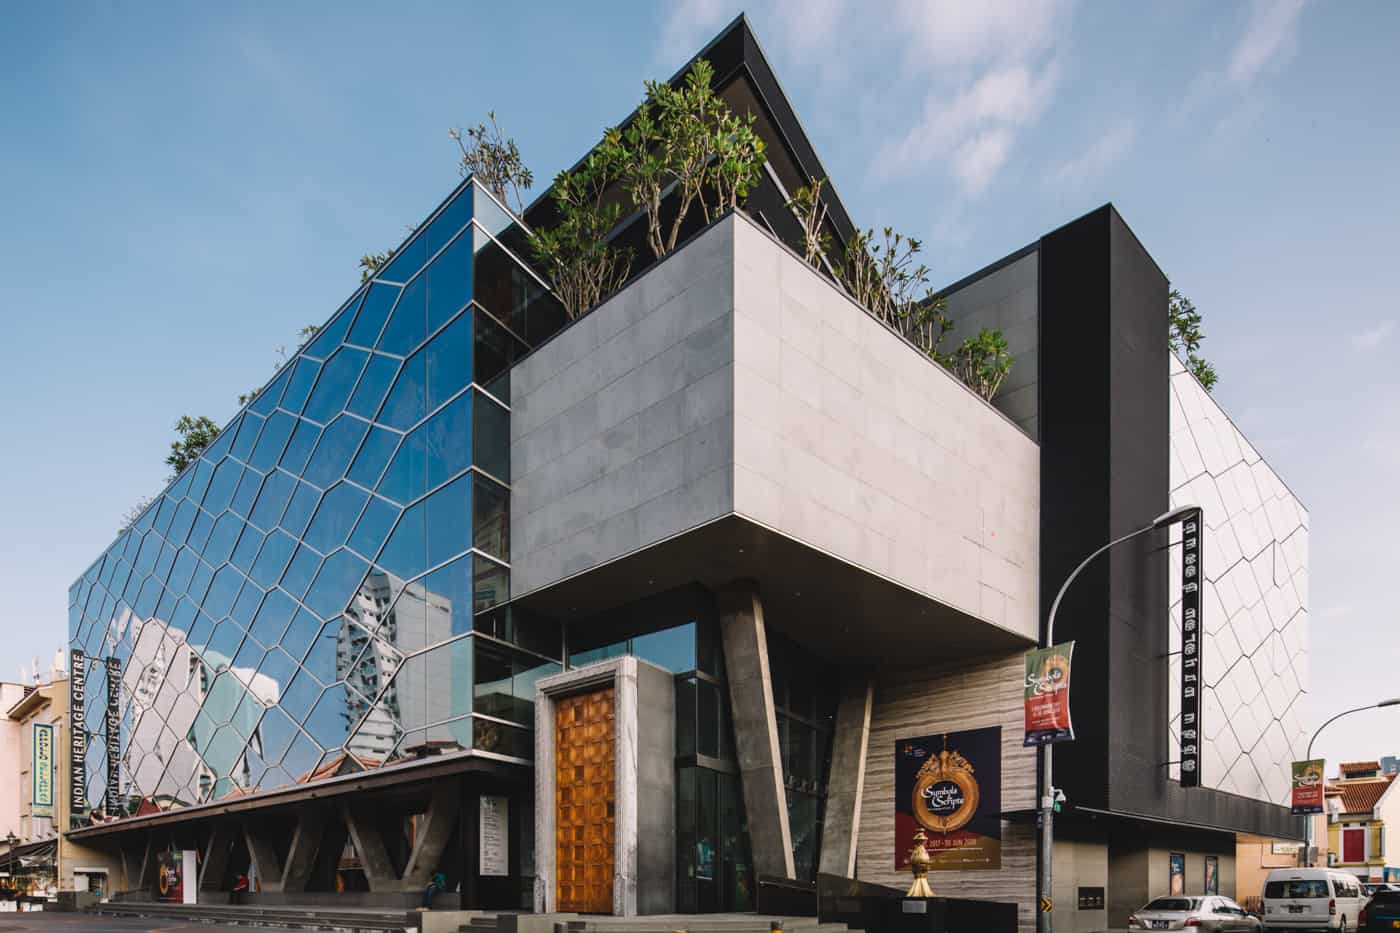 The glass facade and modern white block design of the Indian Heritage Centre in Singapore